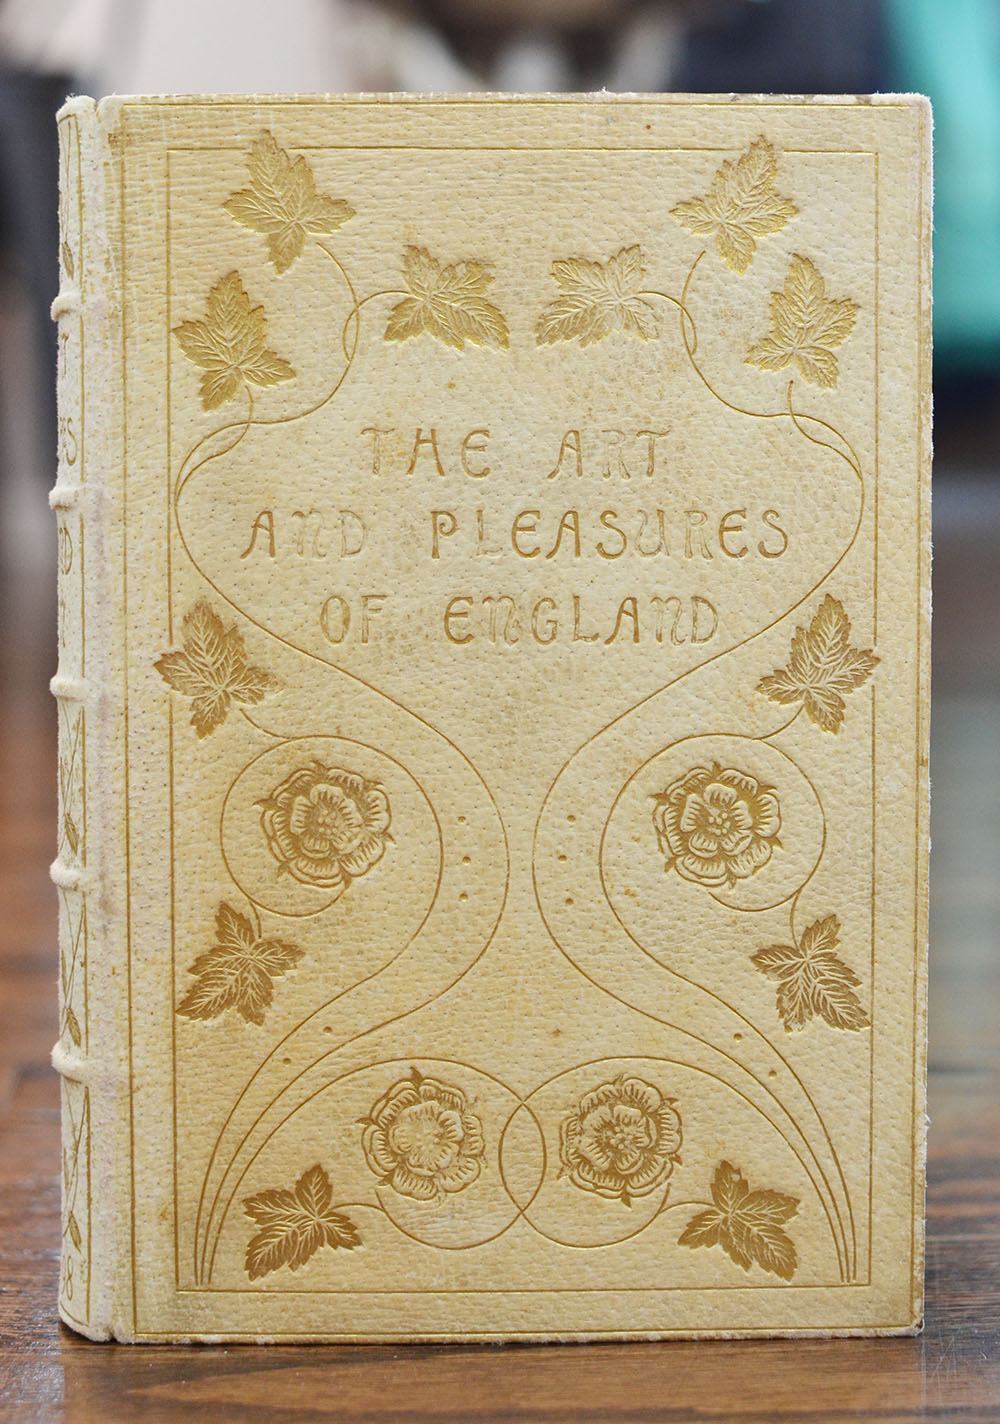 [Fine Binding] The Art of England and the Pleasures of England